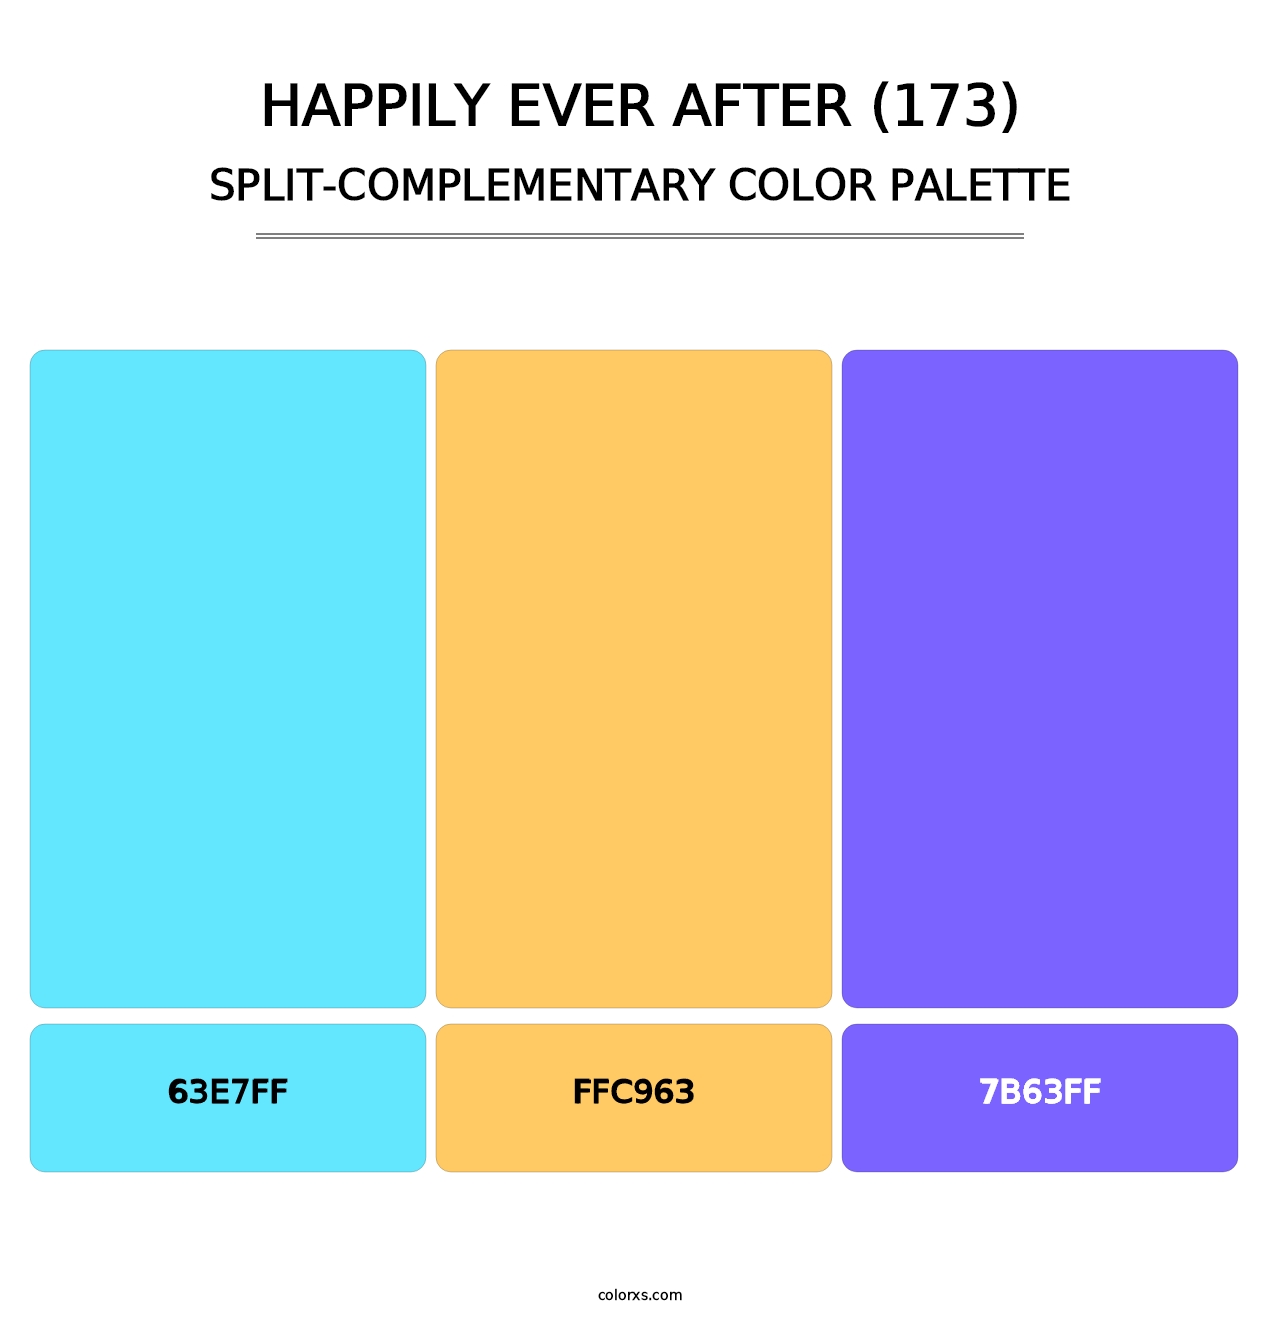 Happily Ever After (173) - Split-Complementary Color Palette